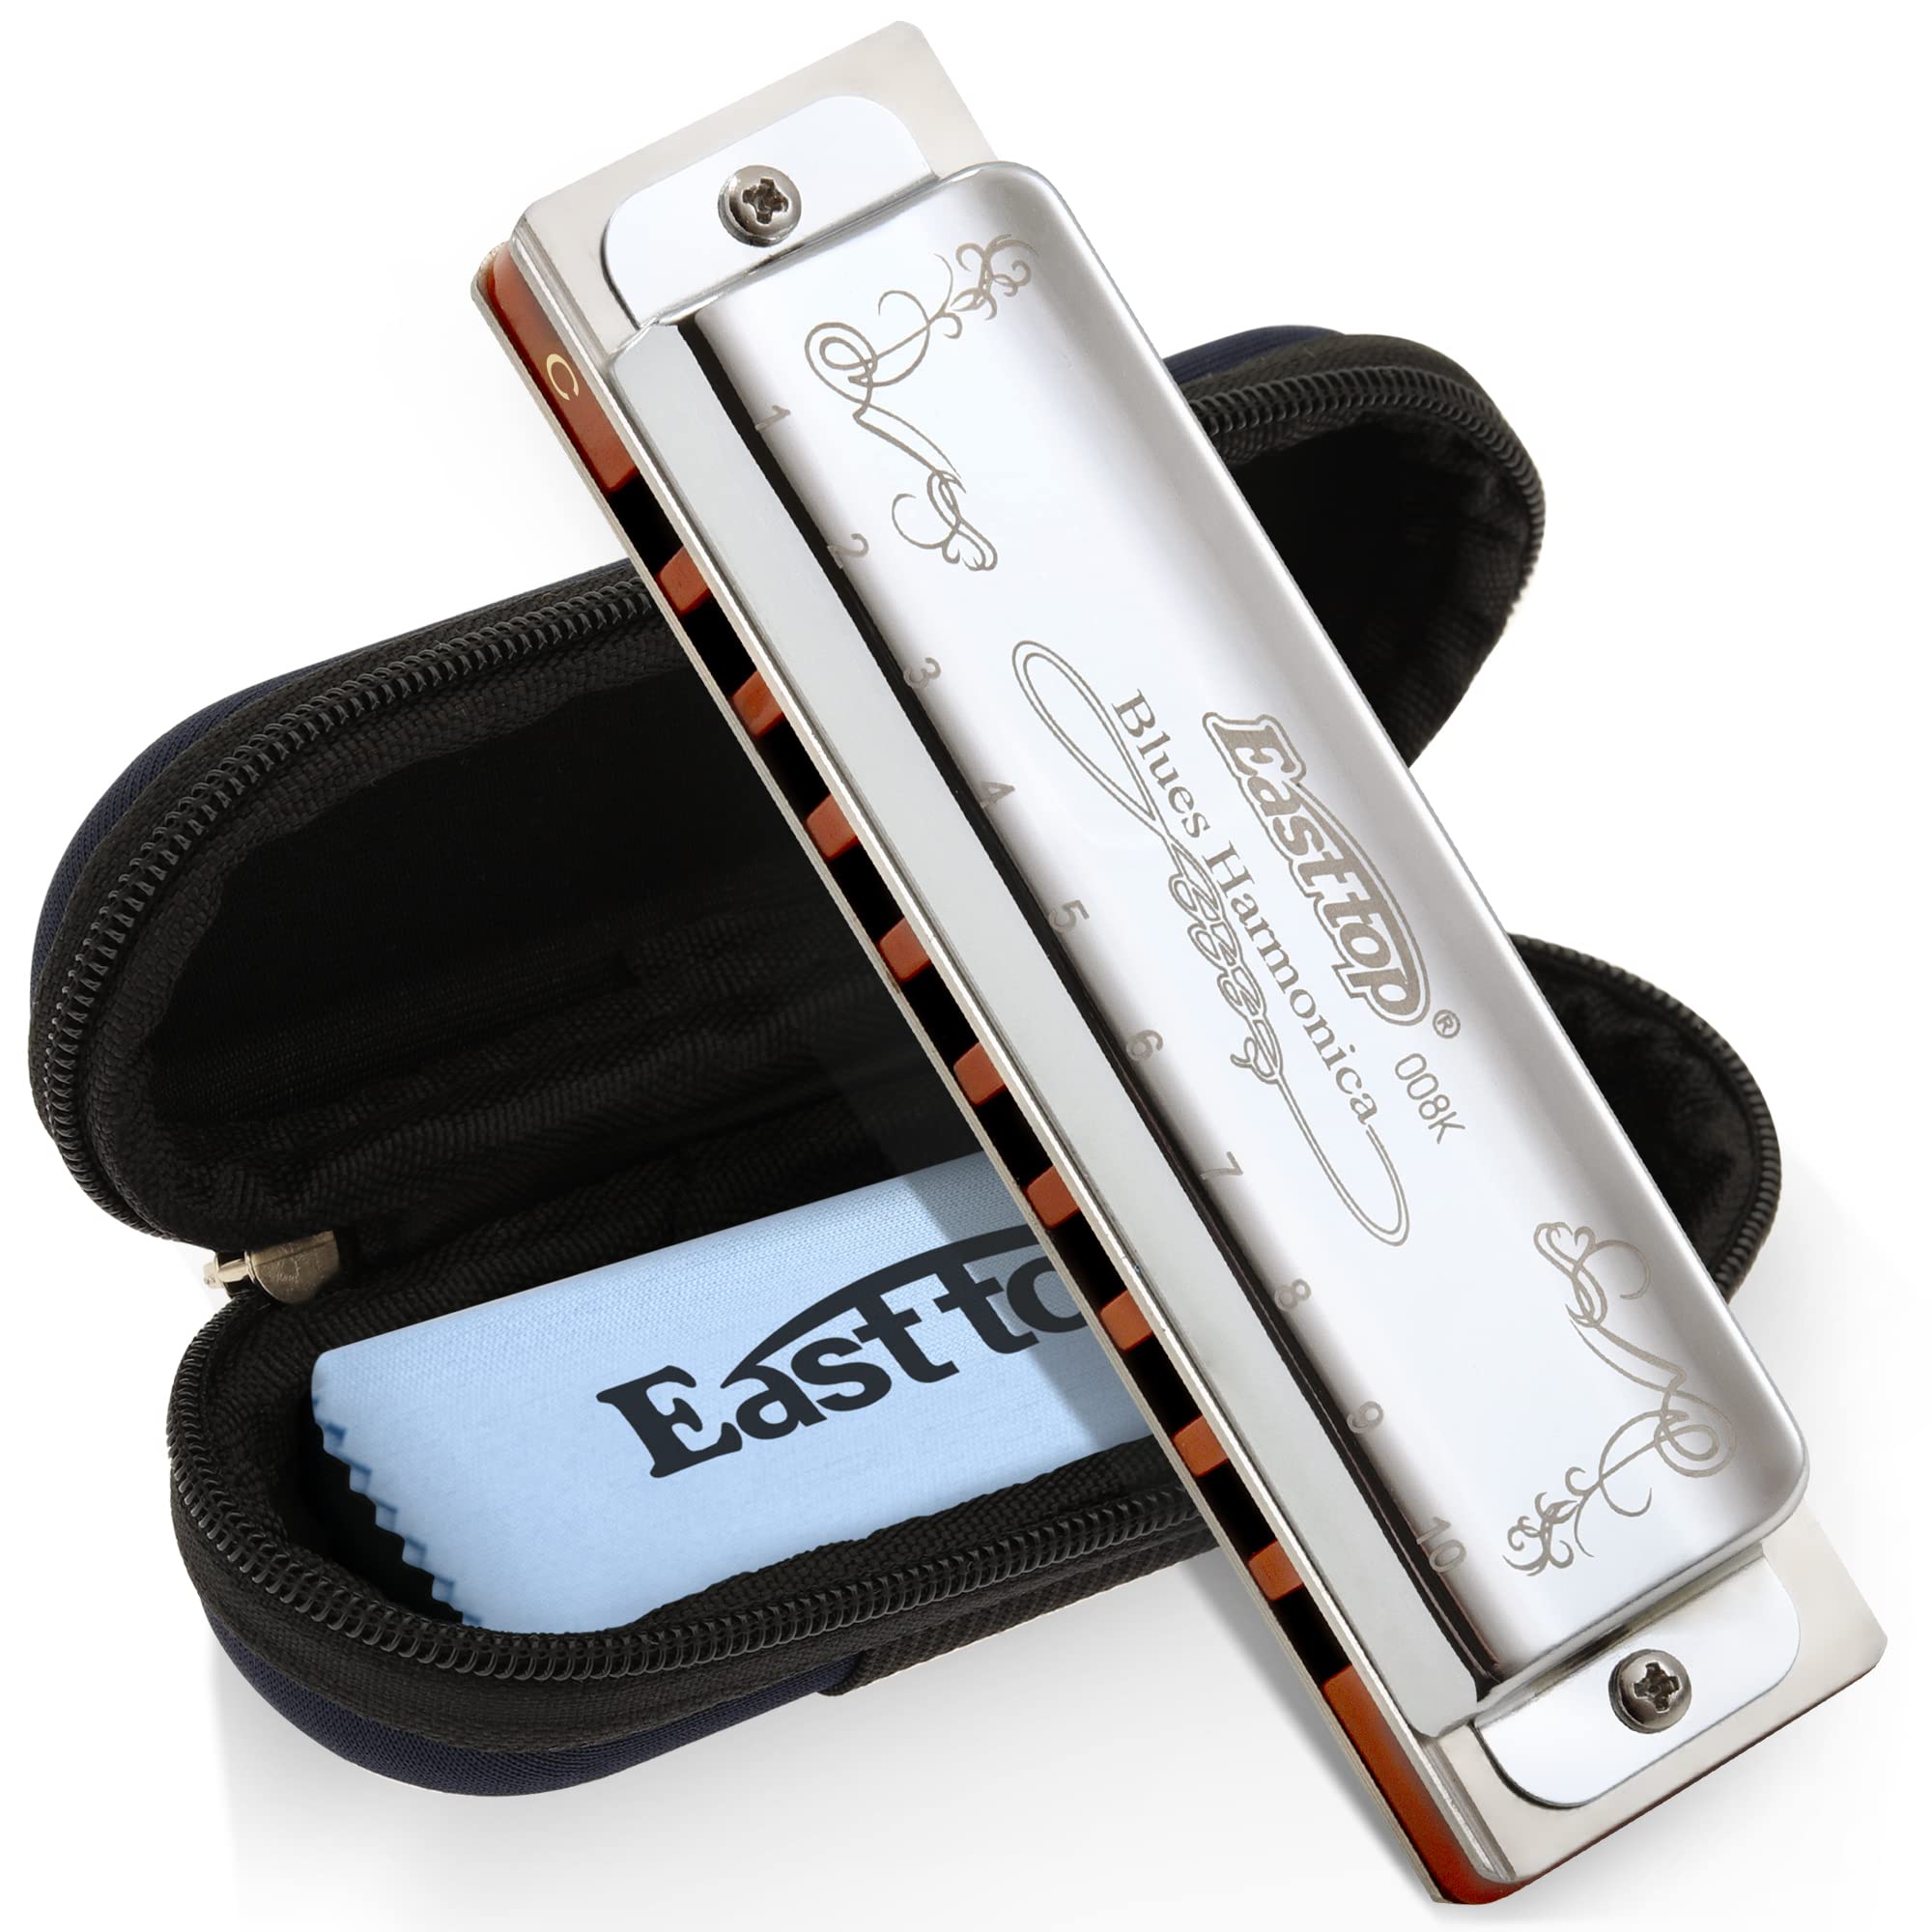 East top 10 Holes 20 Tones 008K Diatonic Harmonica  with Blue/Black/Sliver Case, Major 12 keys available,Standard Harmonicas For Adults, Professional Player, Beginner and Students（T008K-BL/BK/SR）